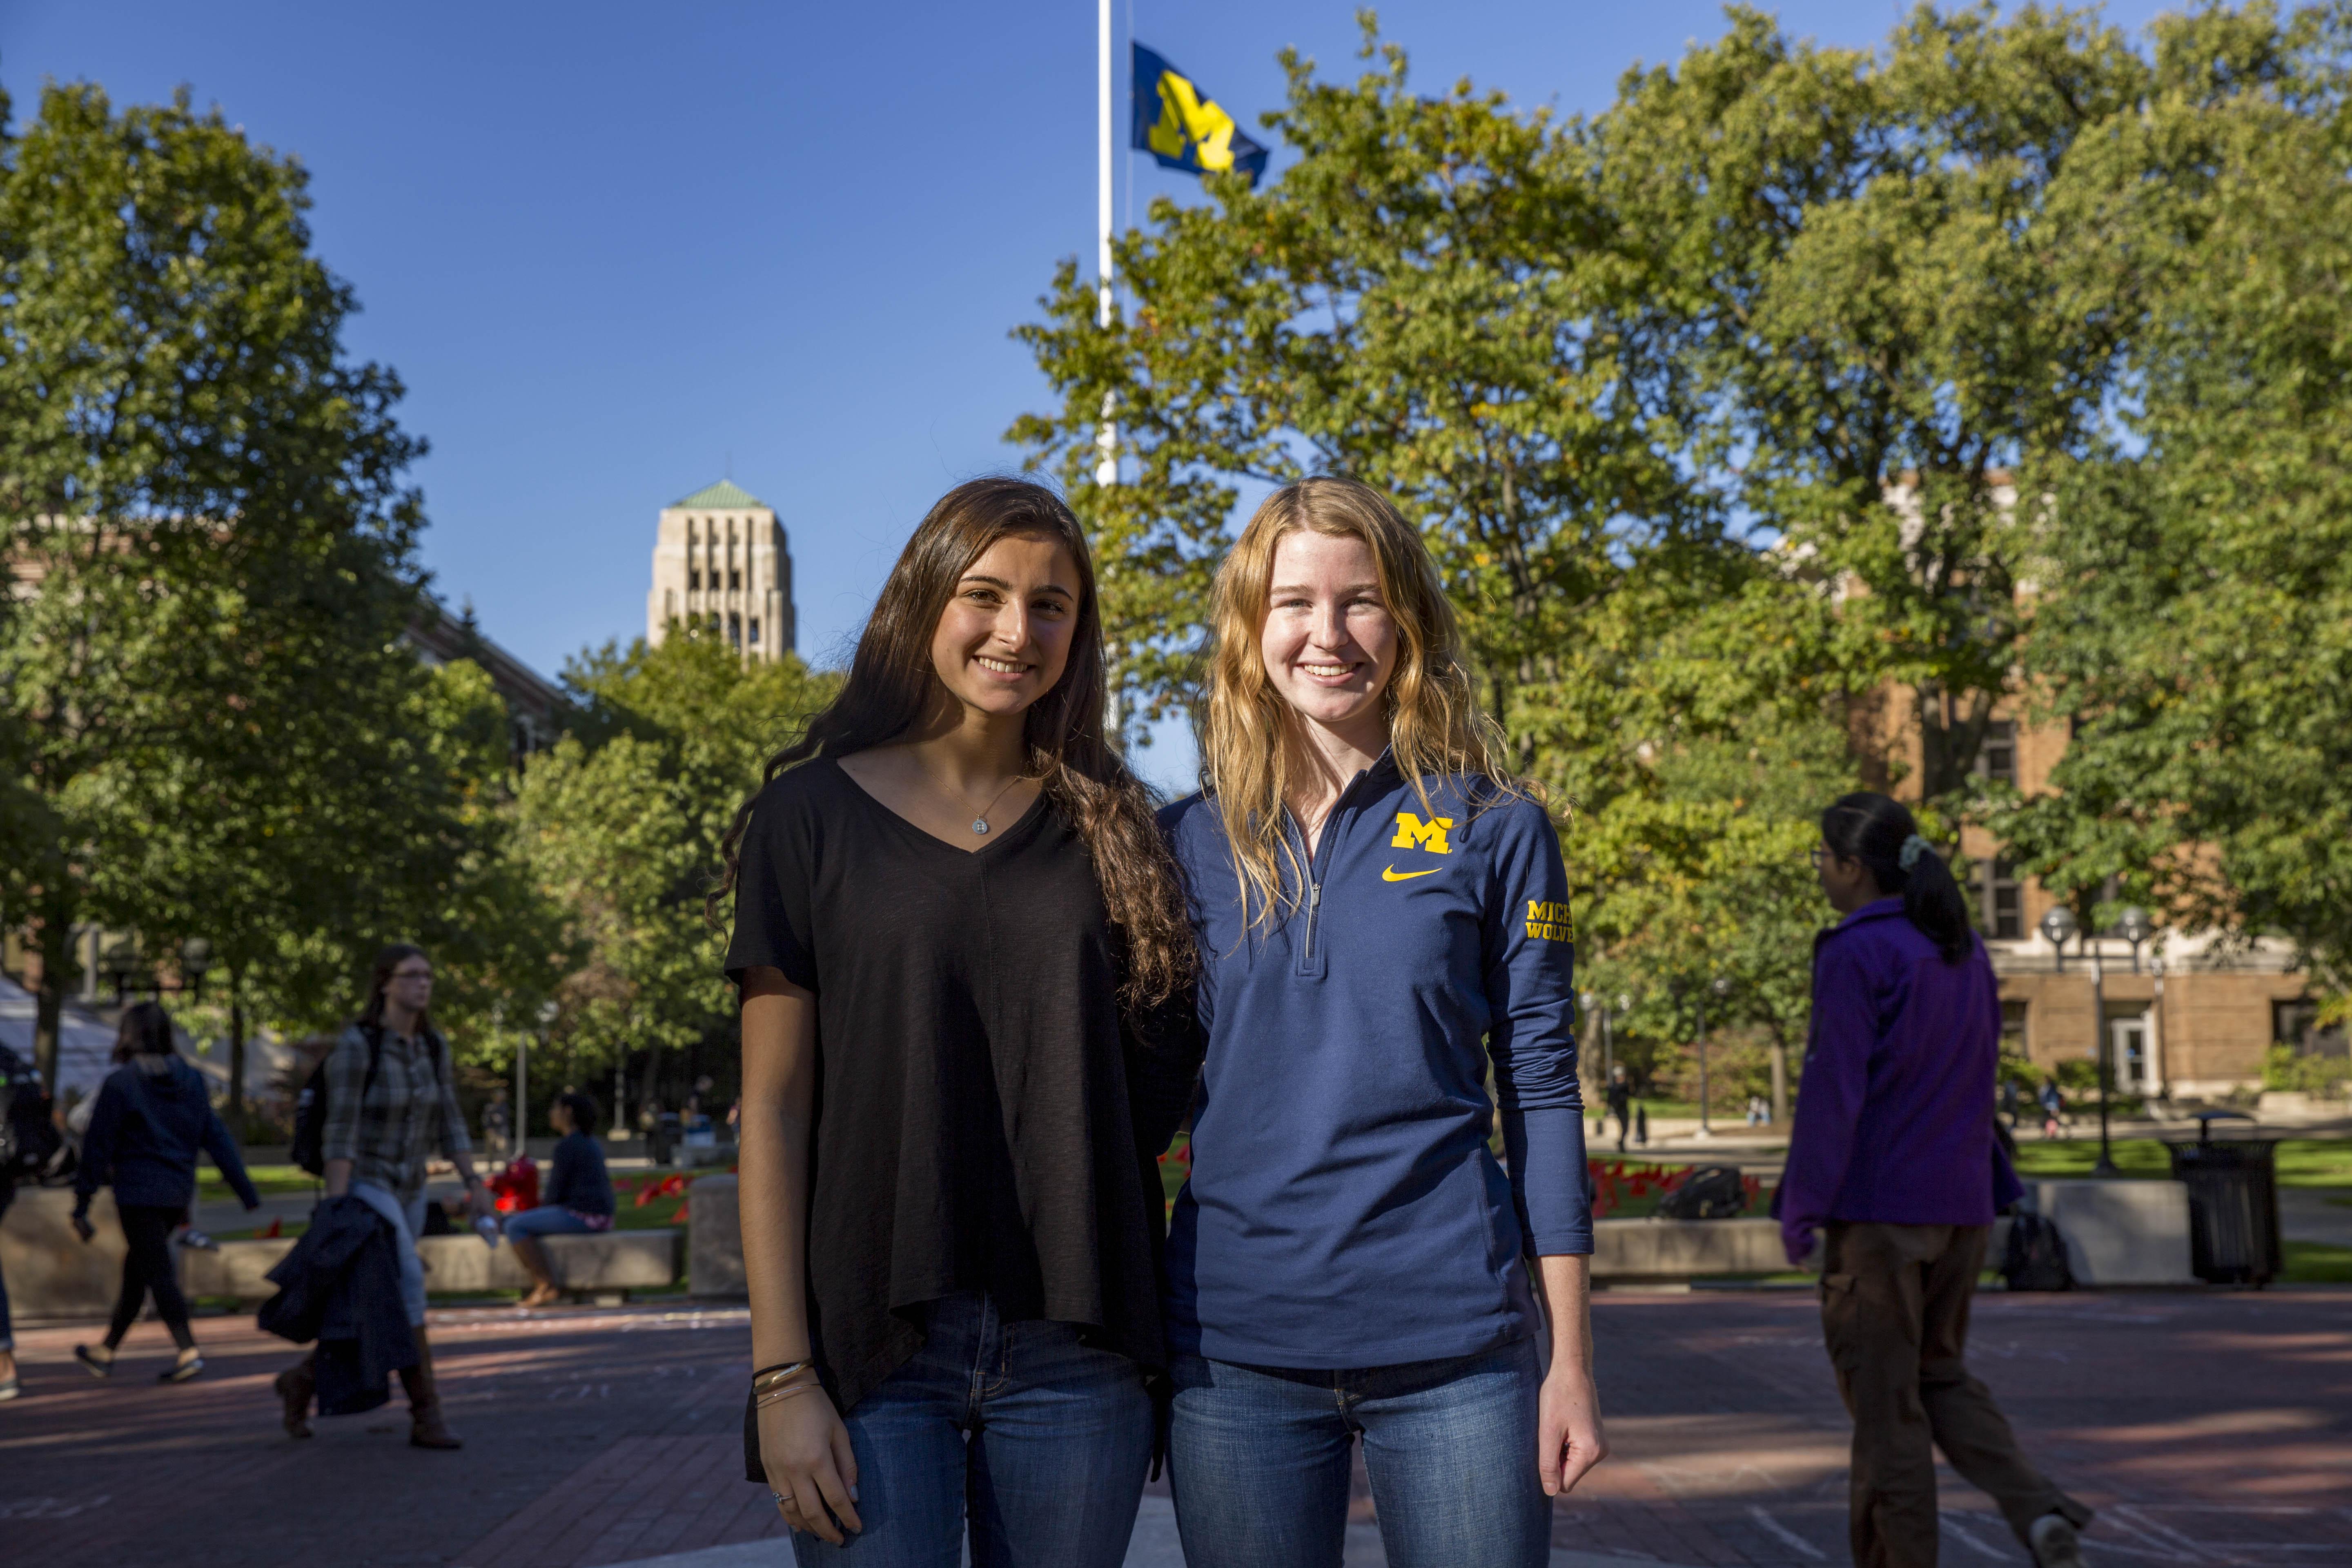 Students Blake Rogelsky and Meghan Hoffman on the University of Michigan campus